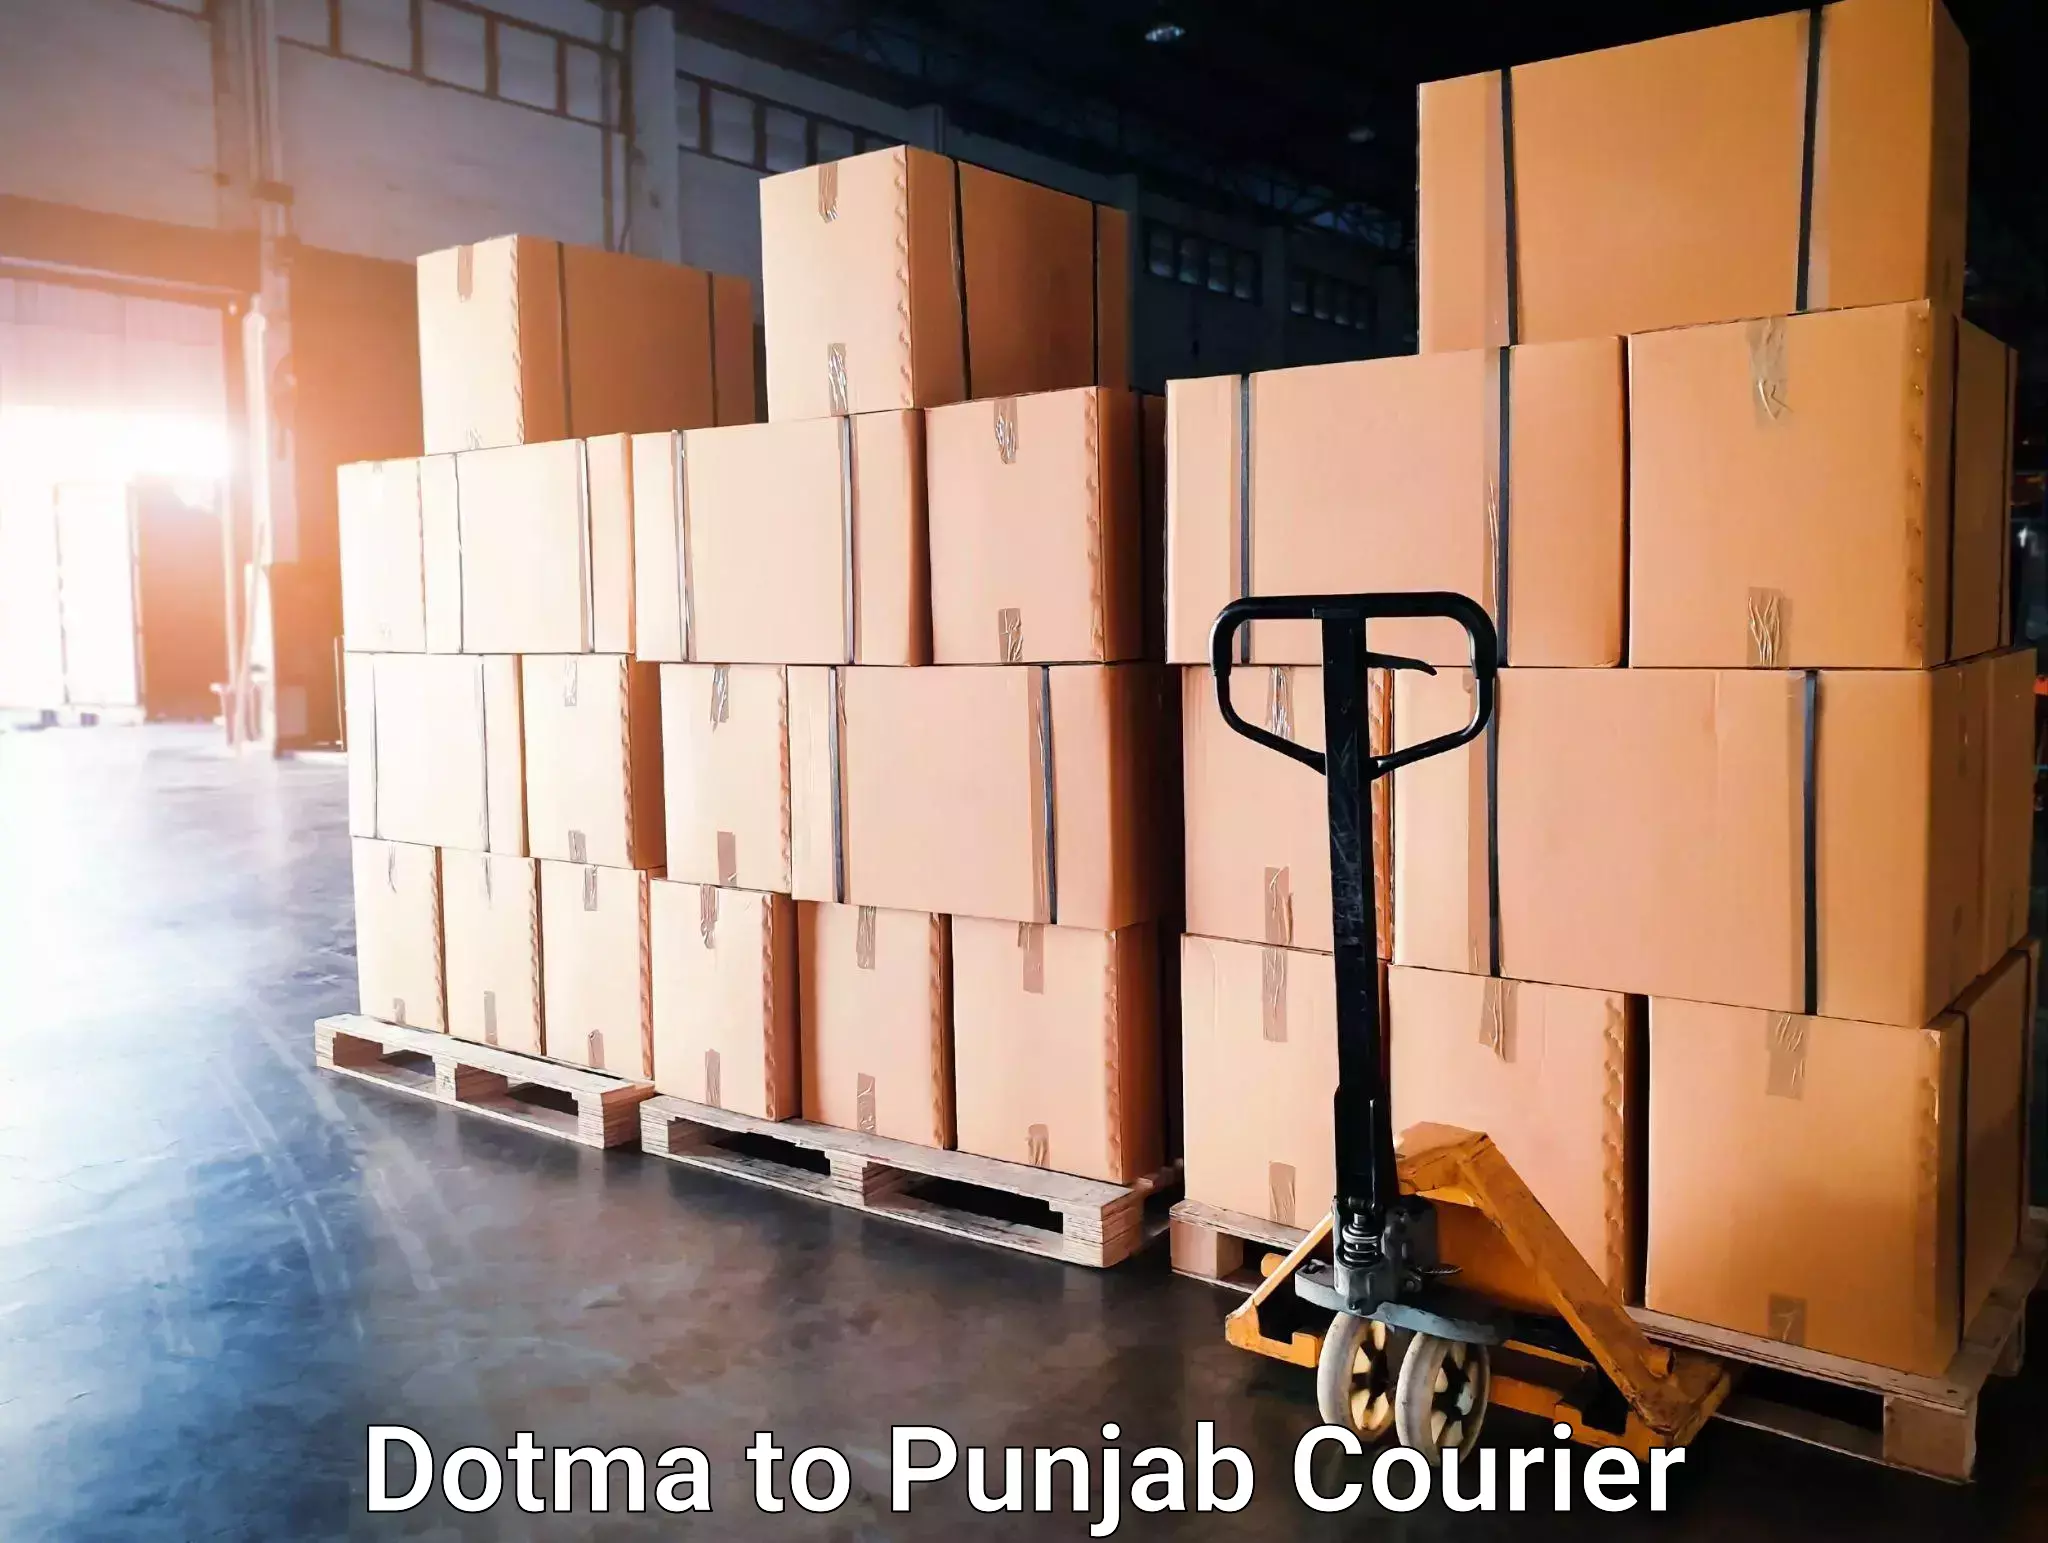 Express courier capabilities Dotma to Punjab